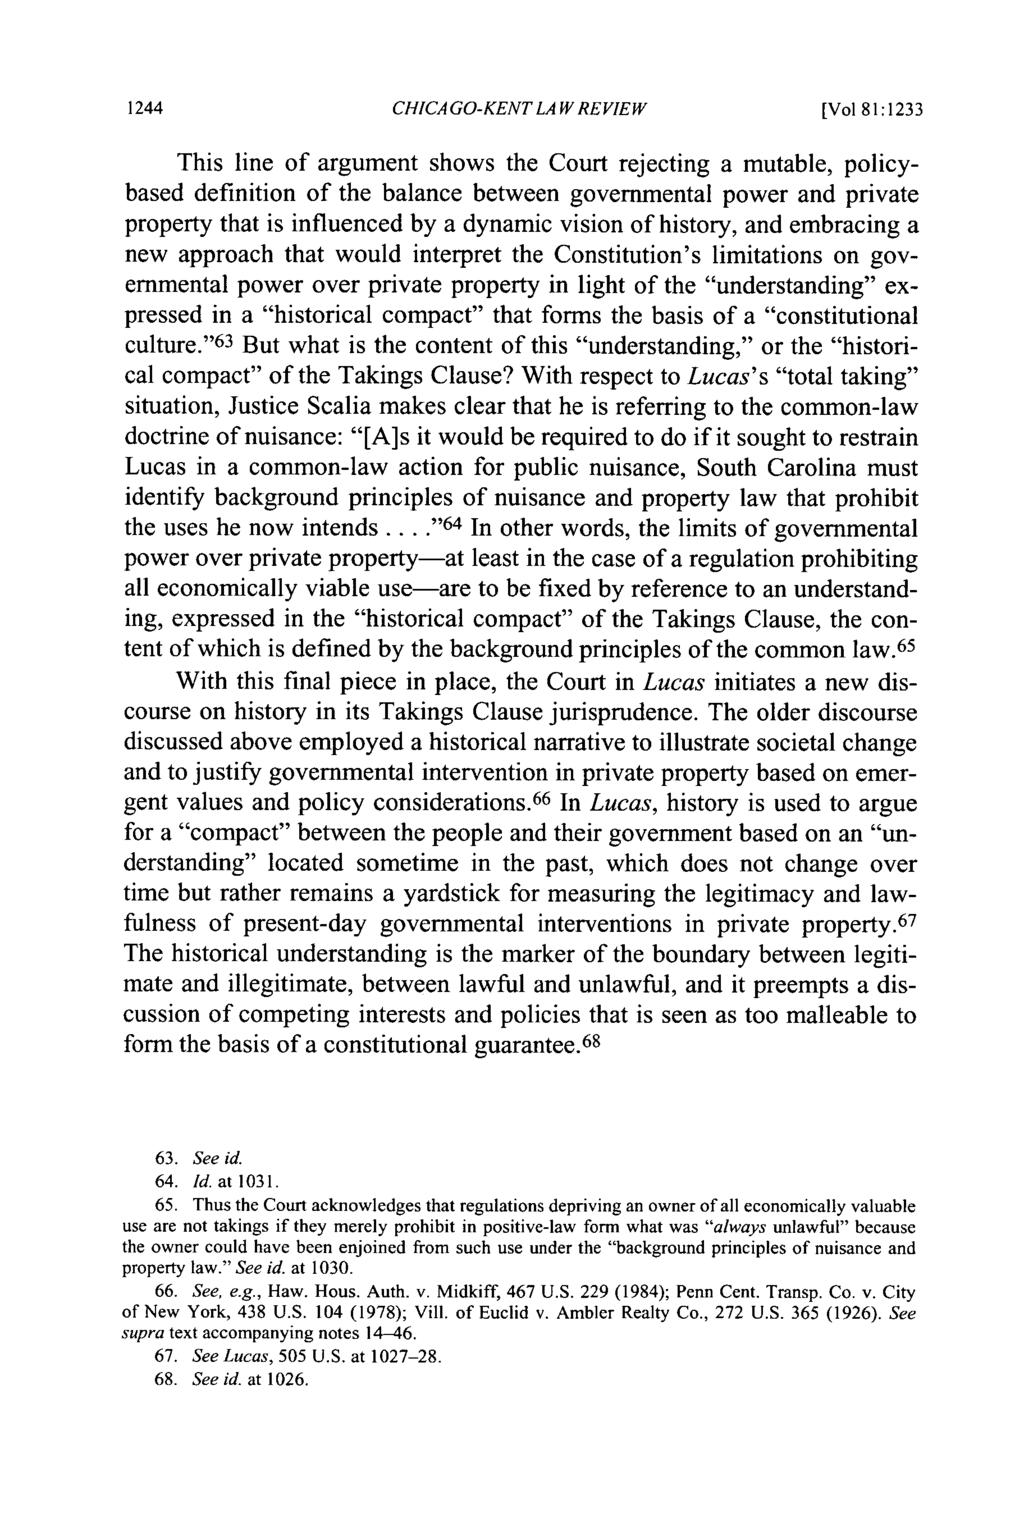 CHICA GO-KENT LAW REVIEW [Vol 81:1233 This line of argument shows the Court rejecting a mutable, policybased definition of the balance between governmental power and private property that is